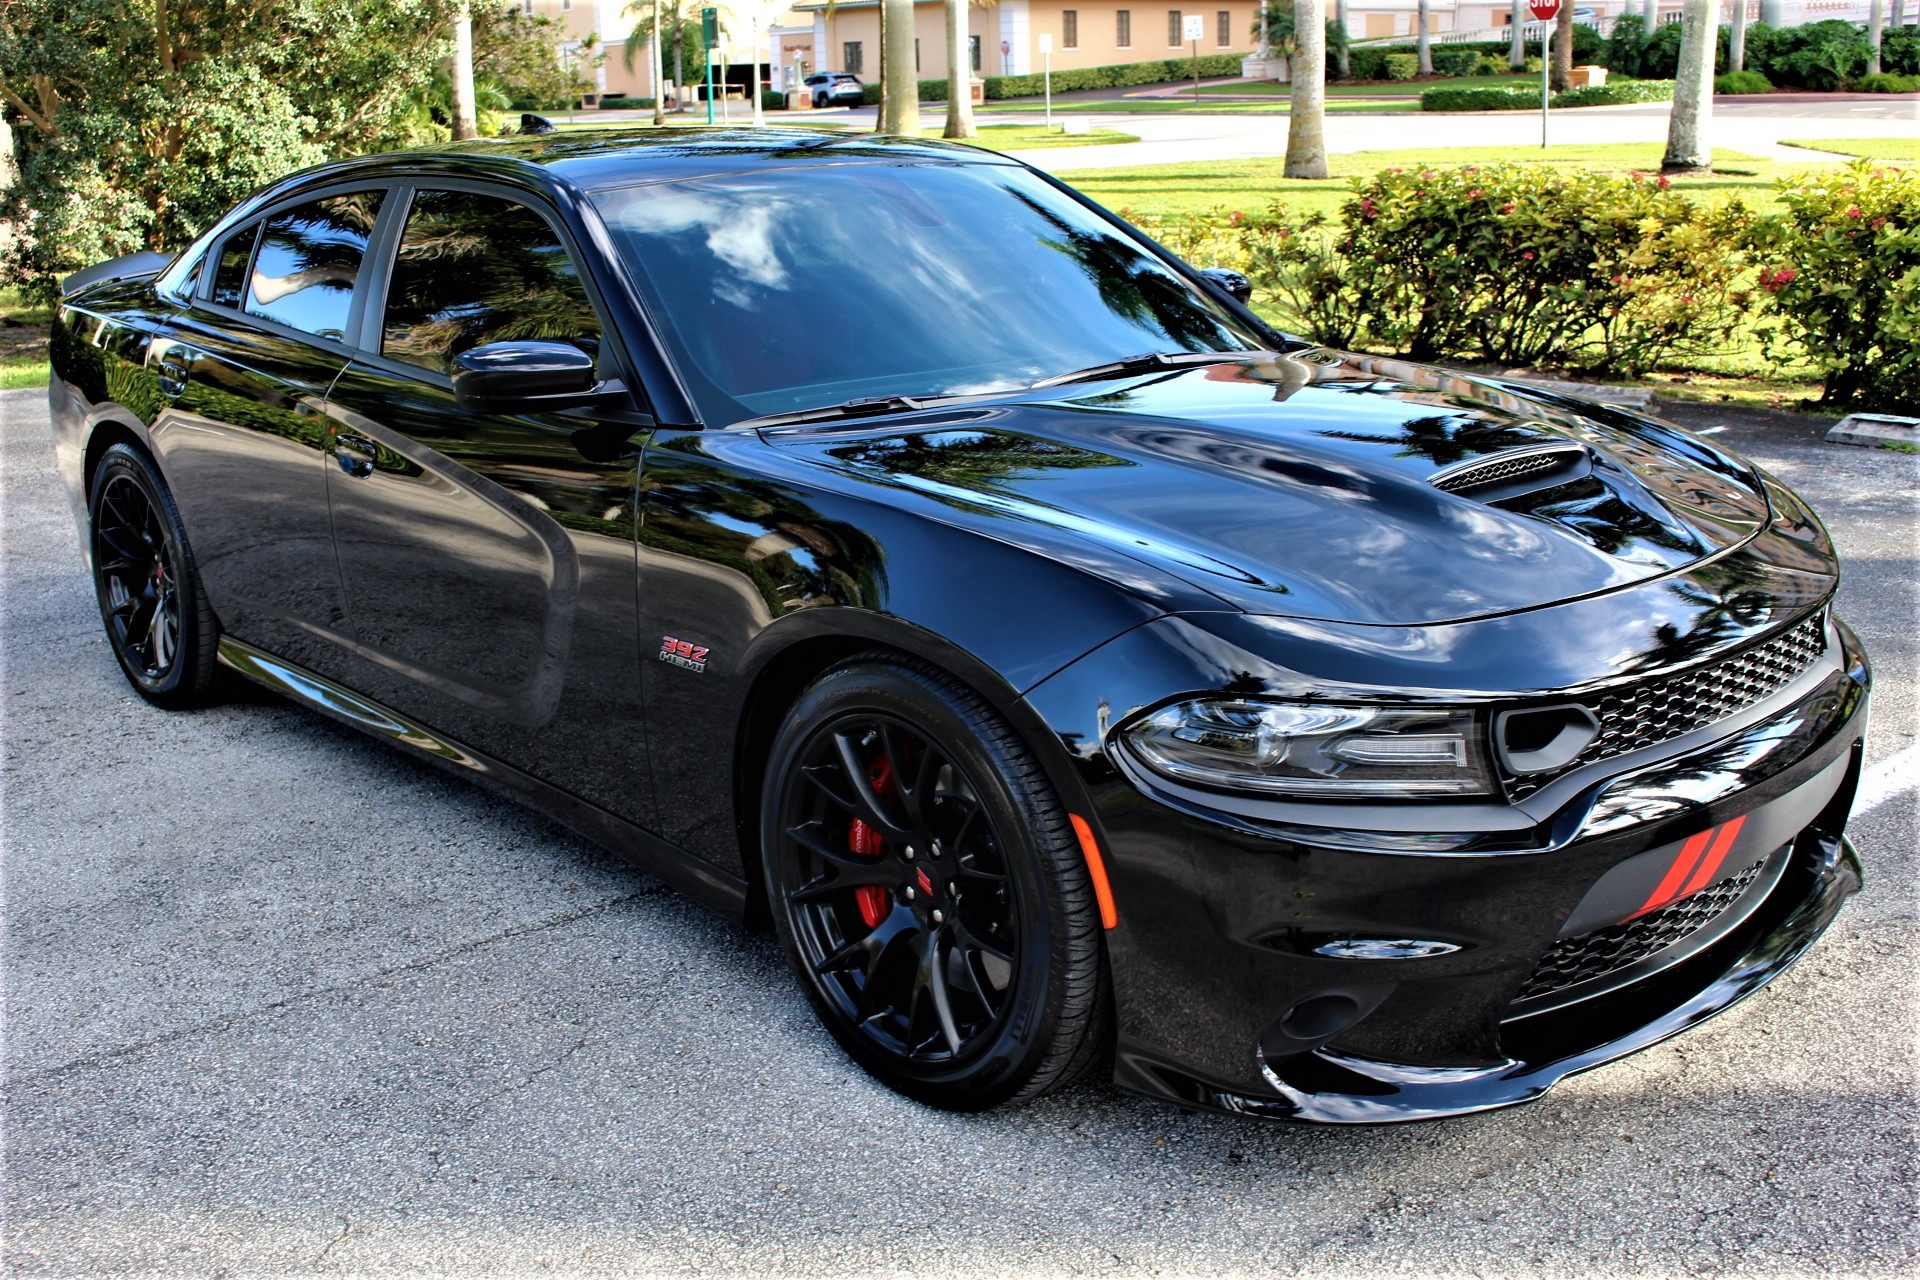 Used 2019 Dodge Charger R T Scat Pack For Sale 35 850 The Gables 